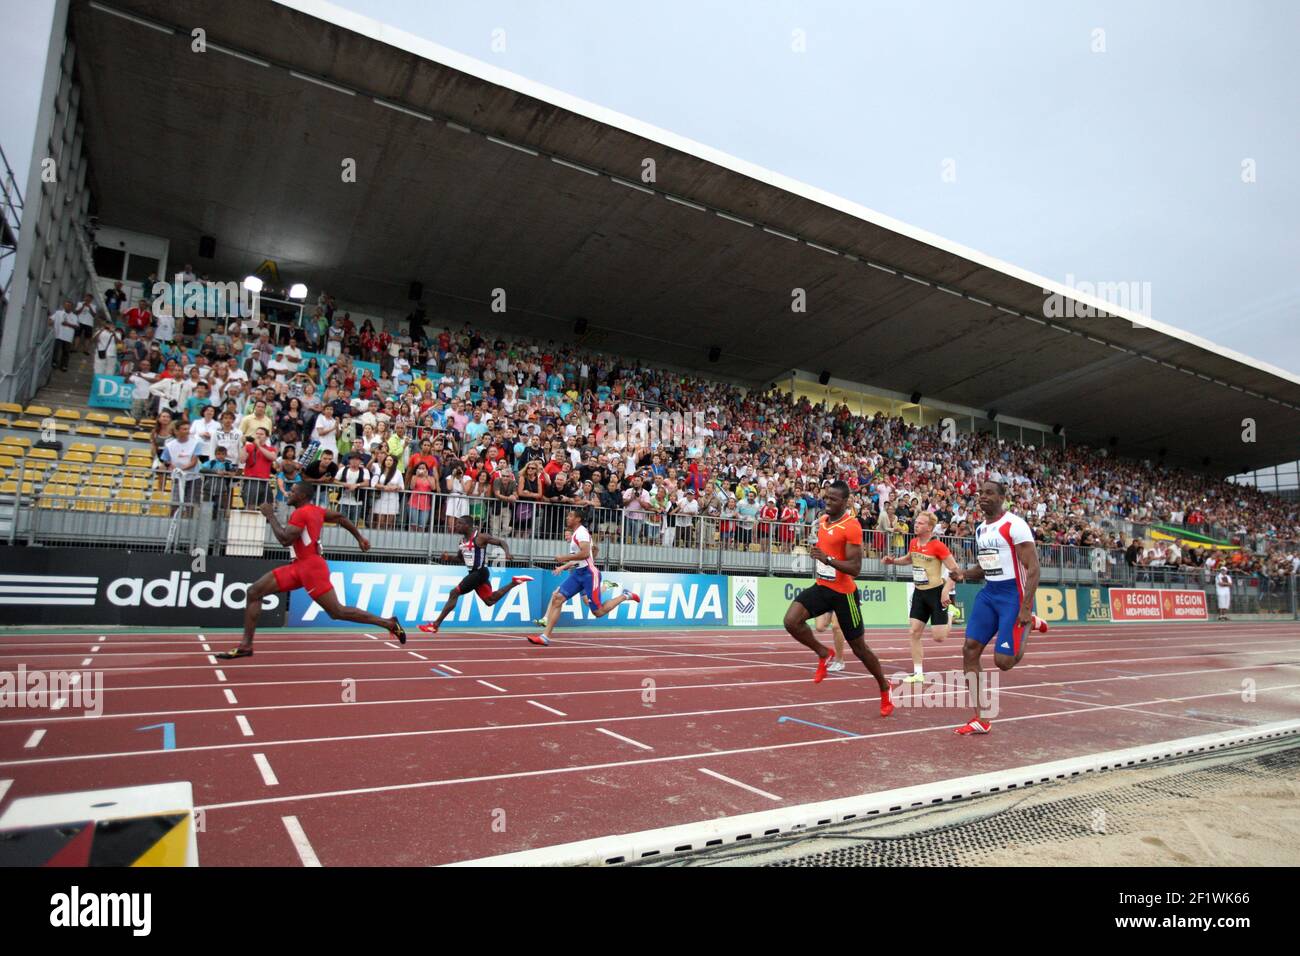 ATHLETICS - DECANATION 2012 - ALBI (FRA) - 15/08/2012 - PHOTO : MANUEL BLONDEAU / KMSP / DPPI - MEN 100M - JUSTIN GATLIN OF USA - DWAIN CHAMBERS OF GREAT BRITAIN - JIMMY VICAUT OF FRANCE - JASON YOUNG OF JAMAICA - MARTIN KELLER OF GERMANY AND RONALD POGNON (FROM L TO R) Stock Photo